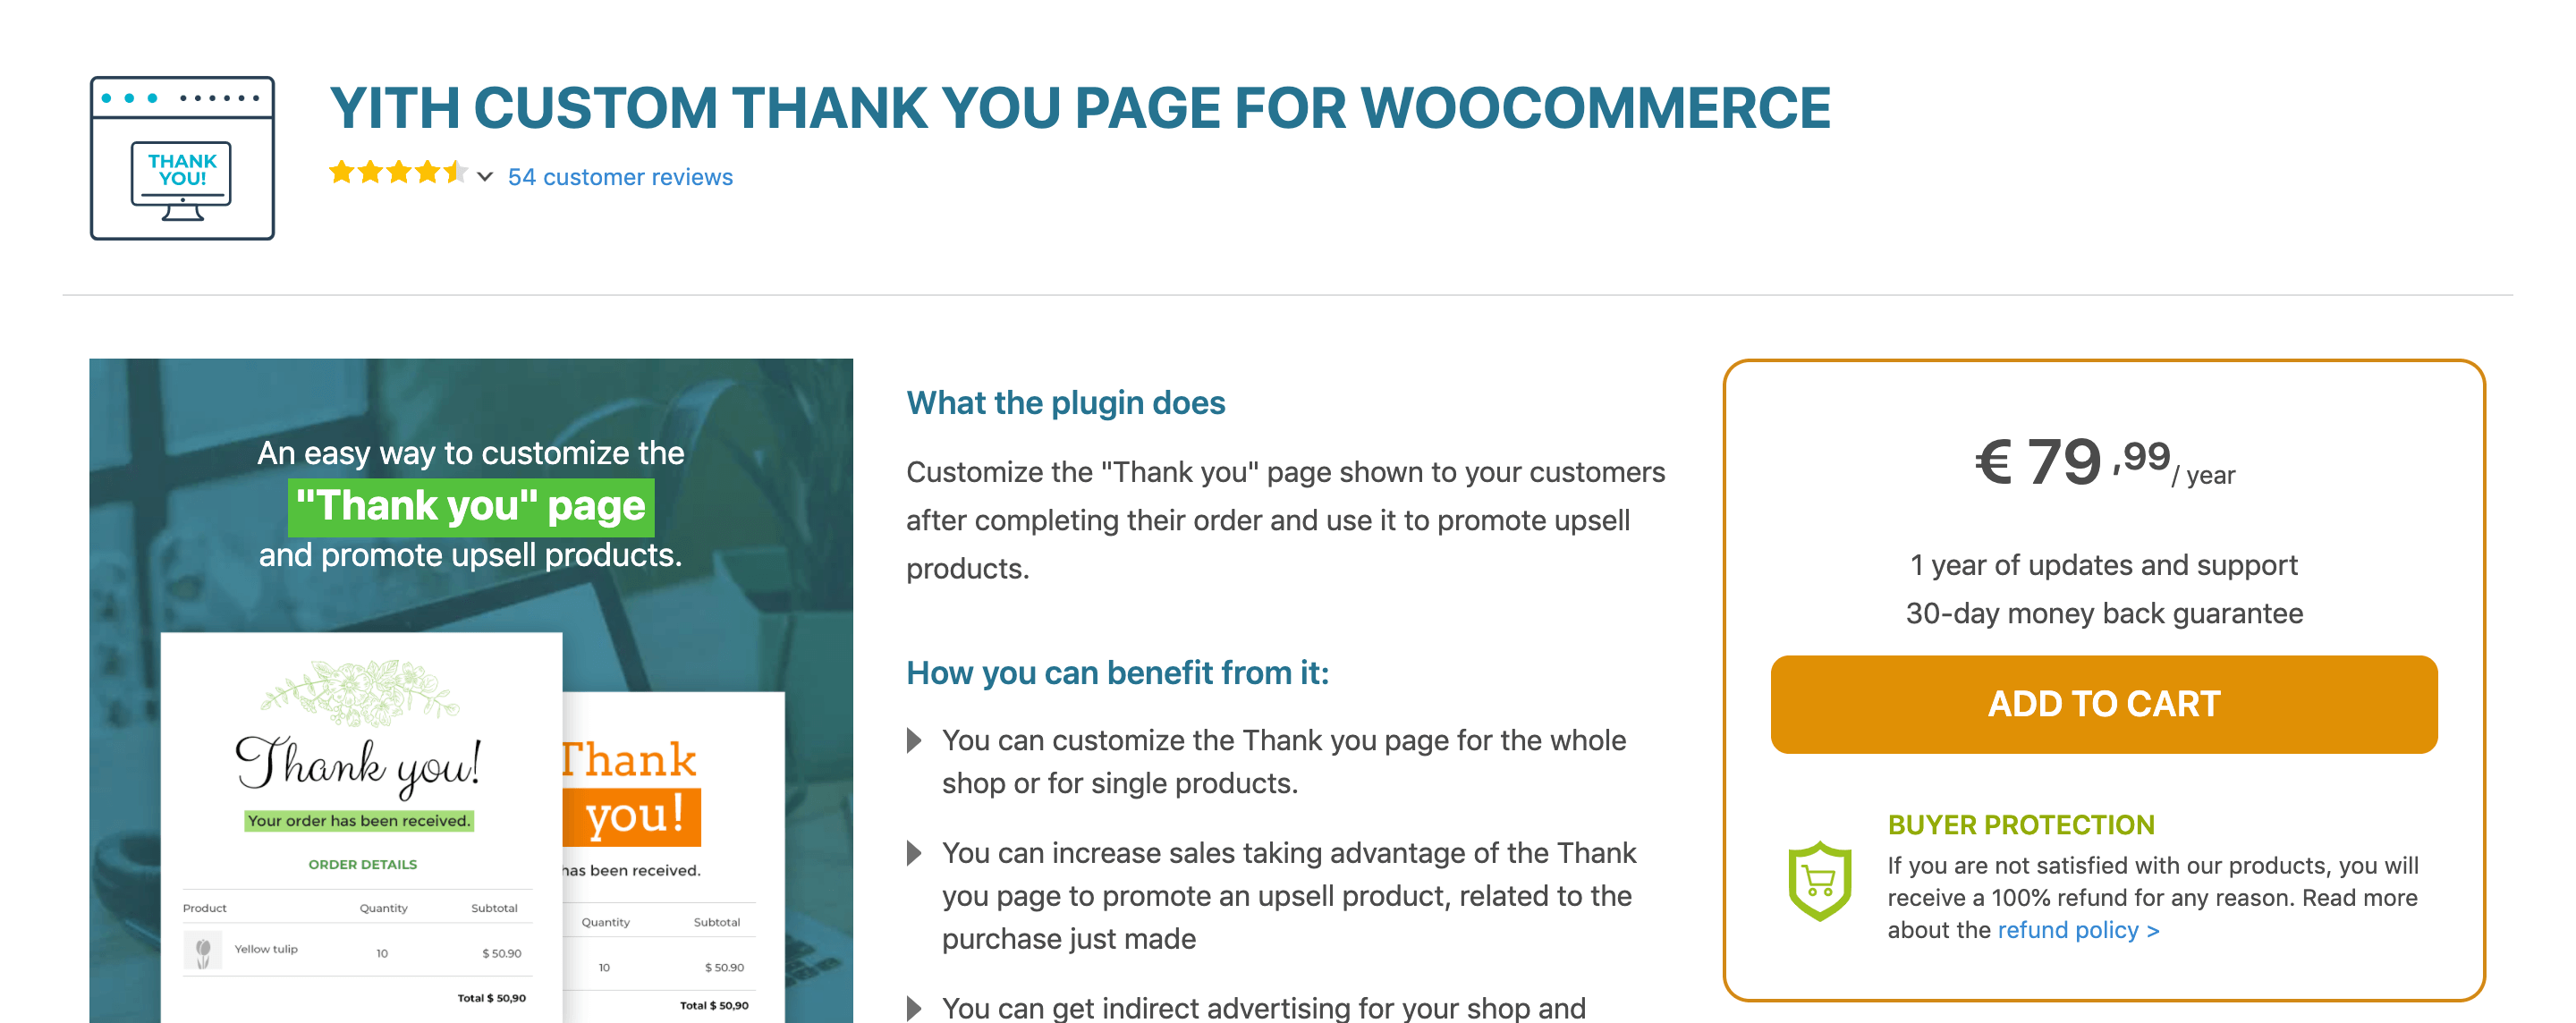 YITH Custom Thank You Page for WooCommerce